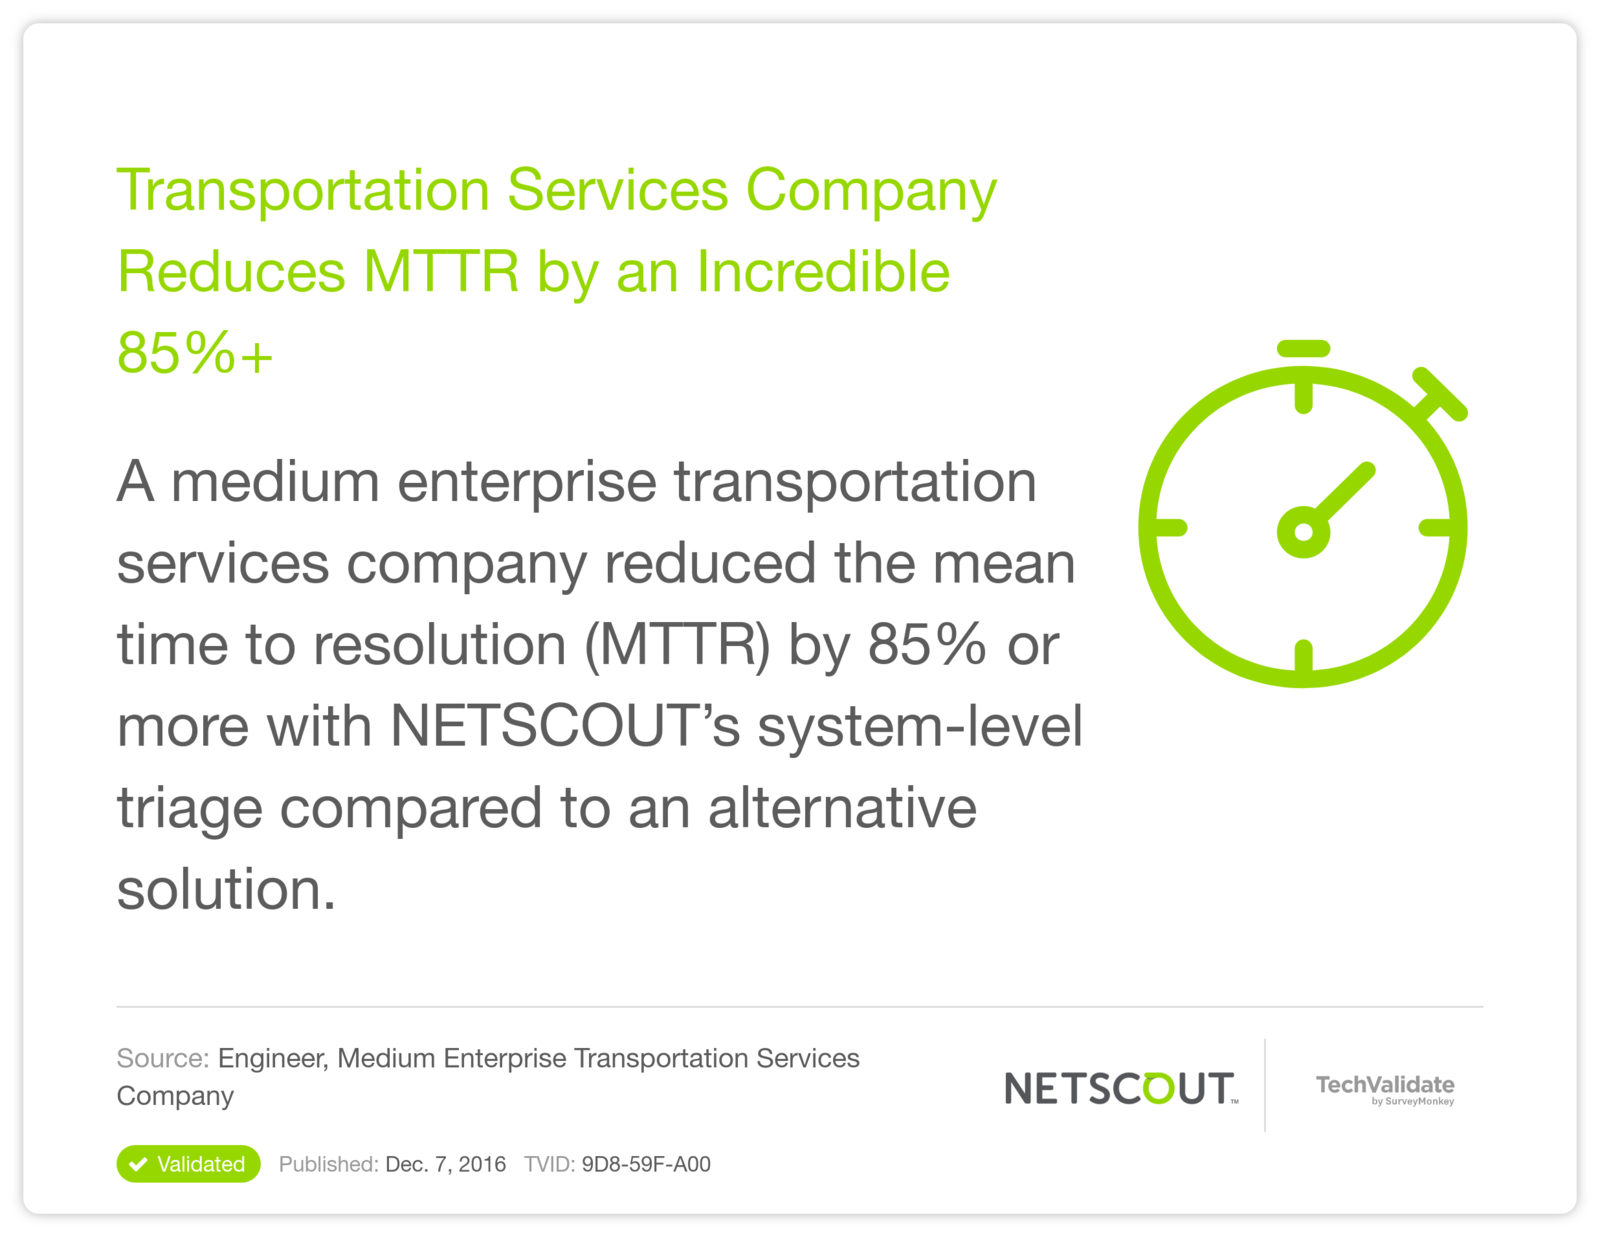 Transportation Services Company Reduces MTTR by an Incredible 85%+